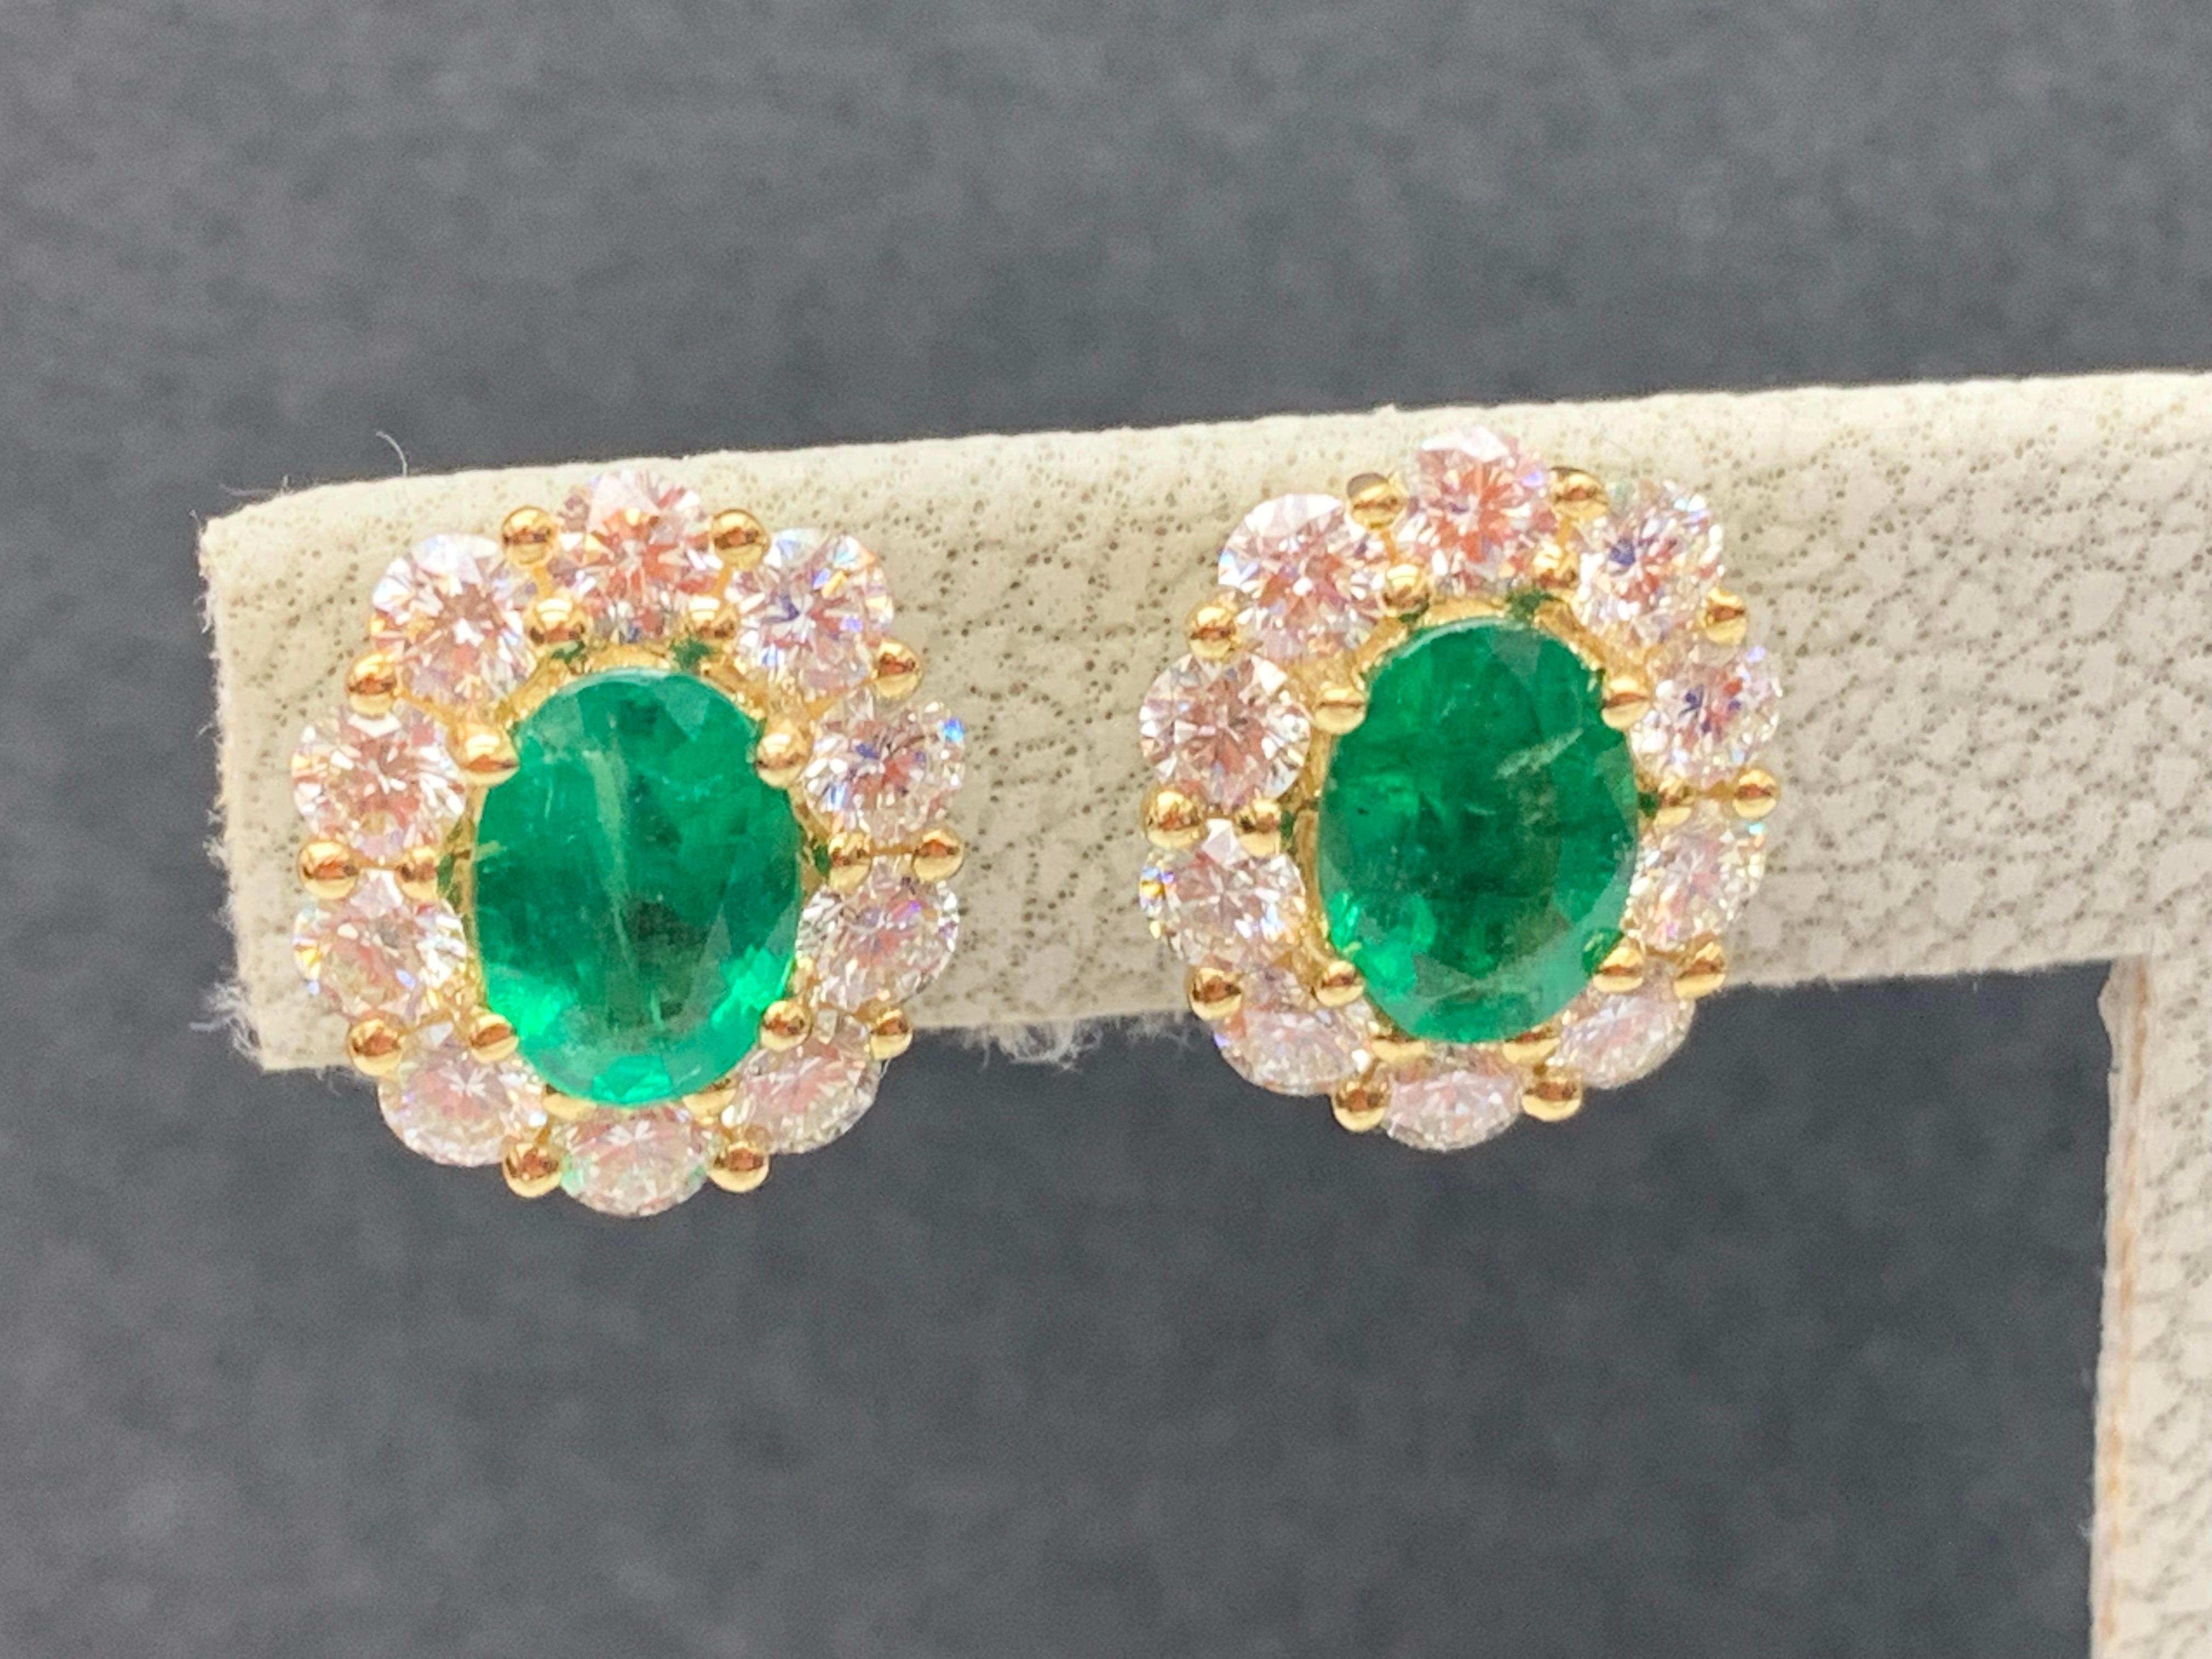 Contemporary 1.28 Carat Oval Cut Emerald and Diamond Stud Earrings in 18K Yellow Gold For Sale